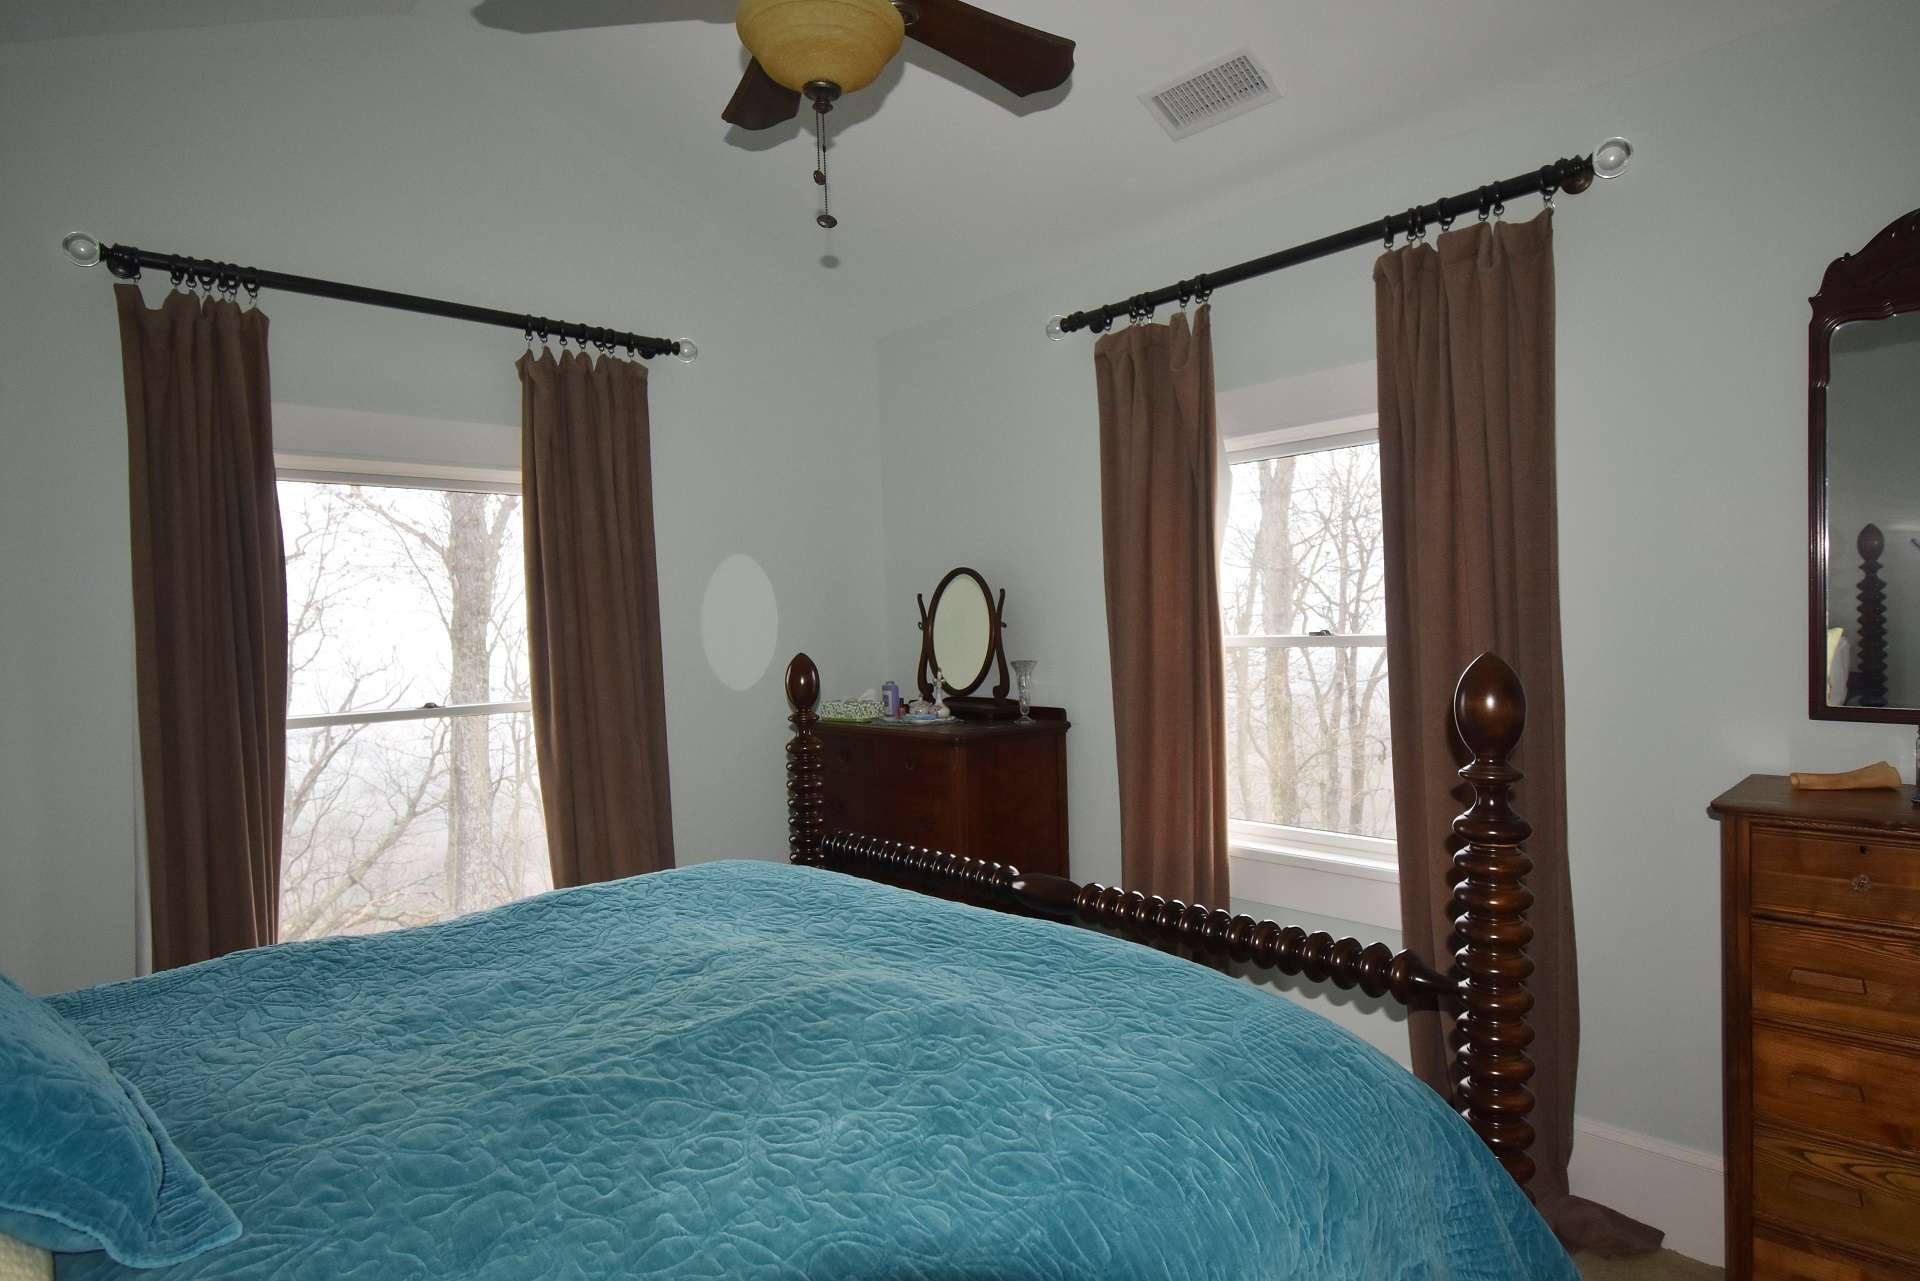 The master bedroom suite is located on the upper level.